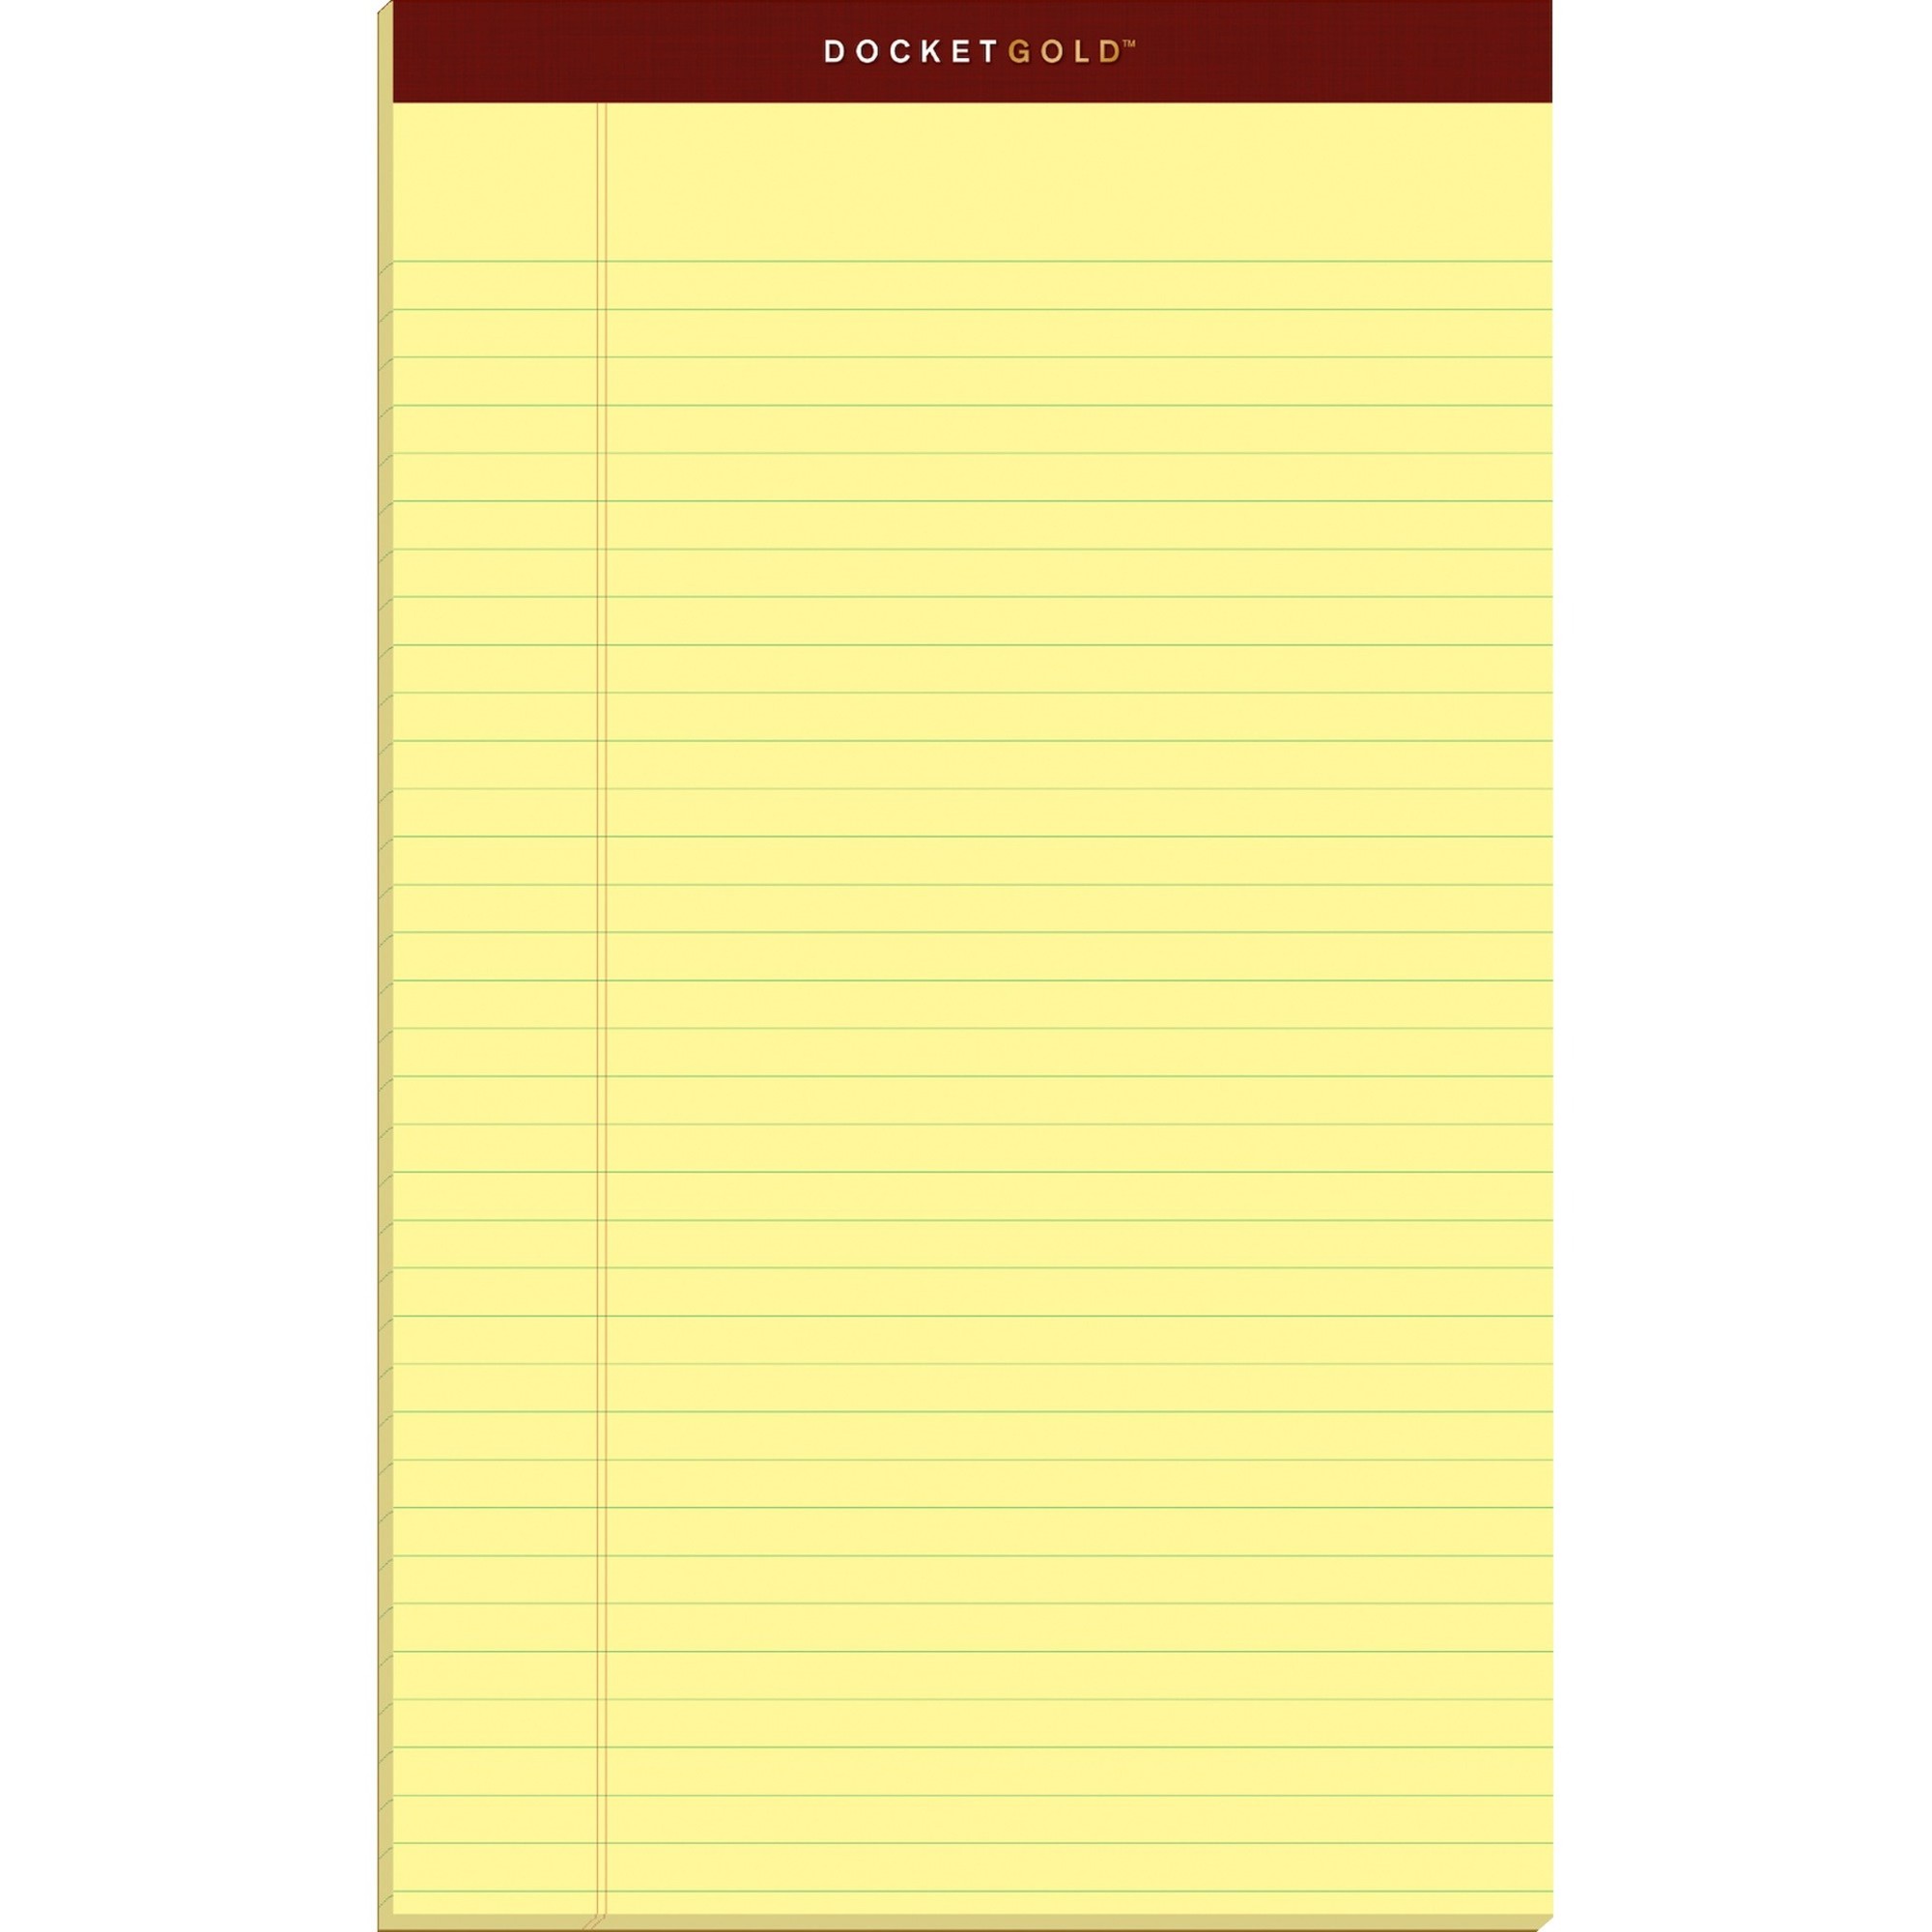 TOPS Docket Gold Legal Pads - Legal - 50 Sheets - Double Stitched - 0.34" Ruled - 20 lb Basis Weight - Legal - 8 1/2" x 14" - Ca